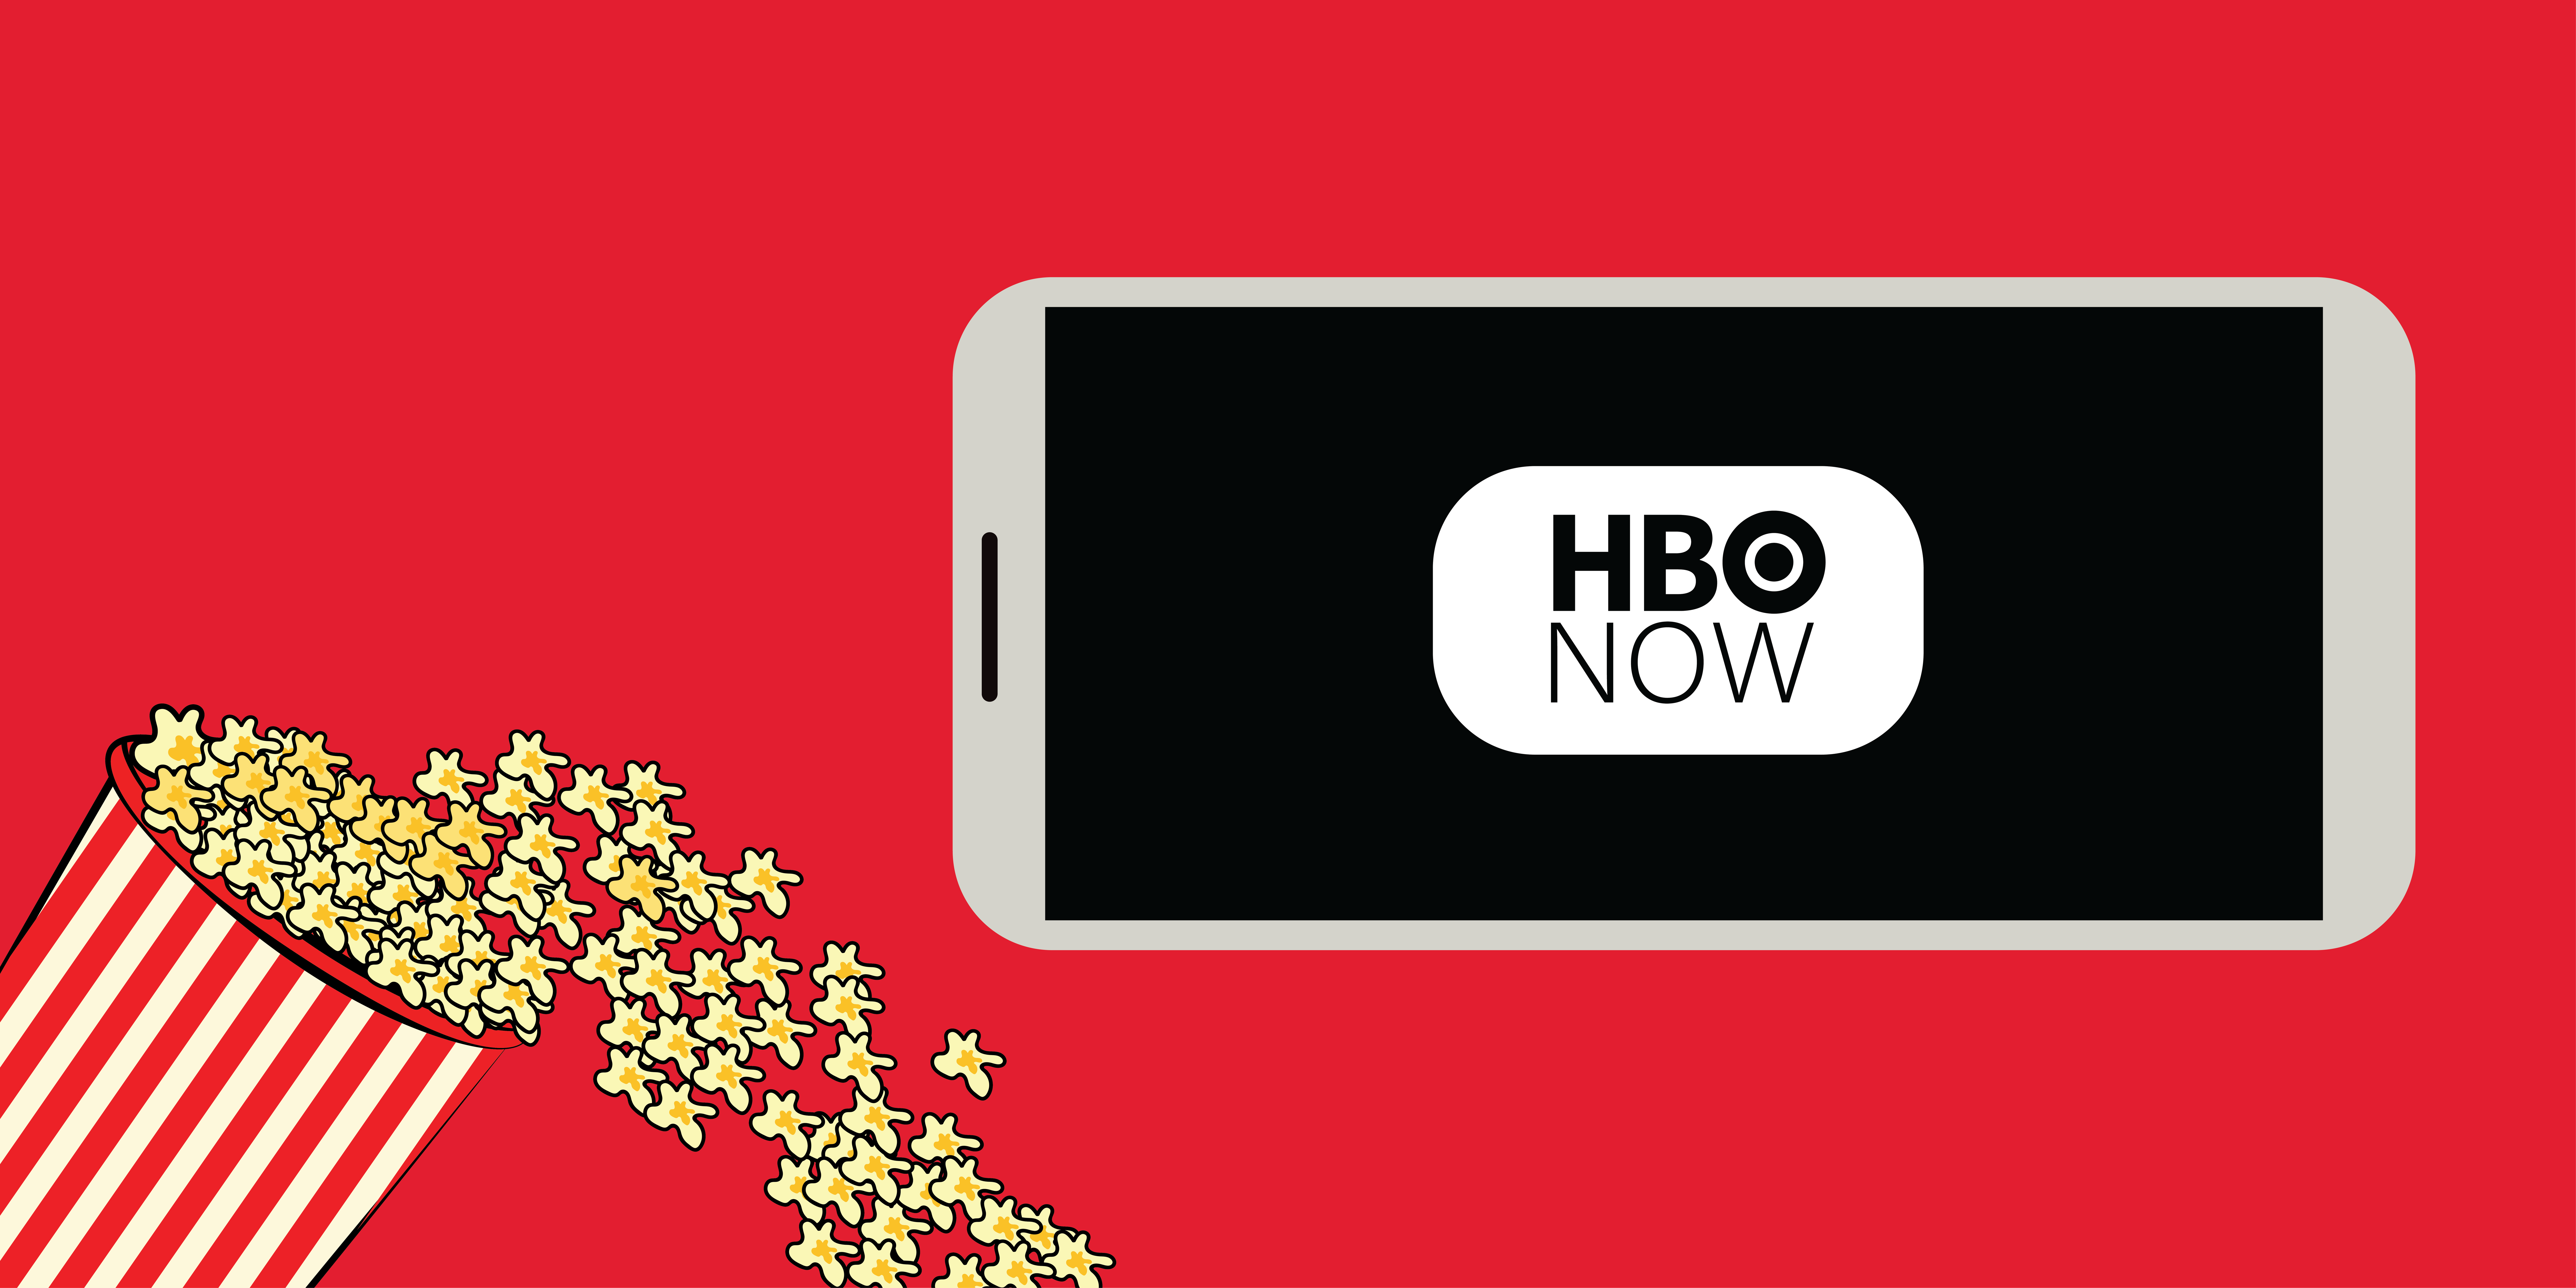 HBO Now video streaming app